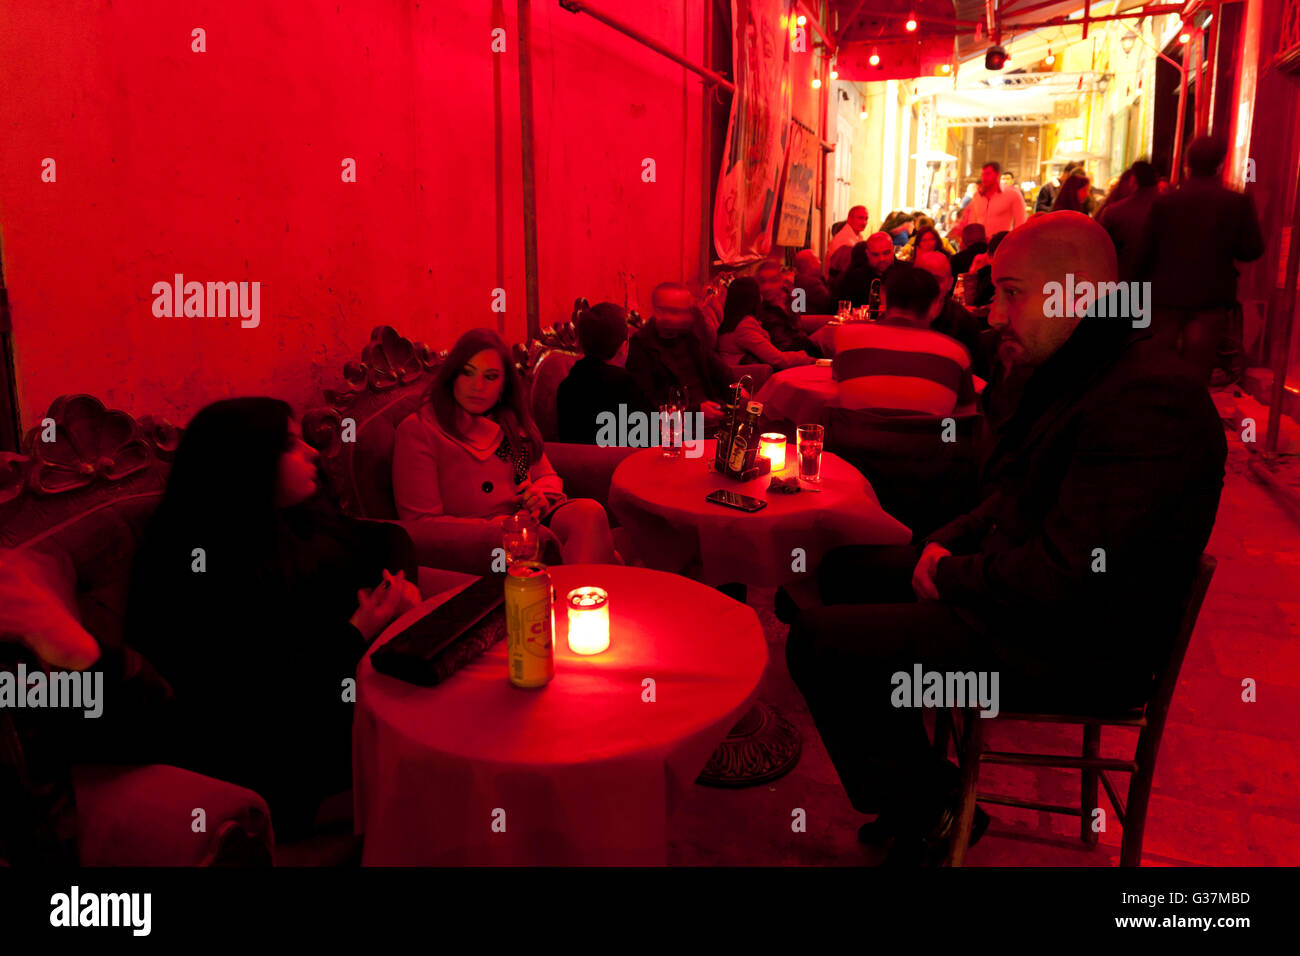 Retro decor and red lighting evoke the history of debauchery in Strait Street which used to be Malta's red light district. Stock Photo